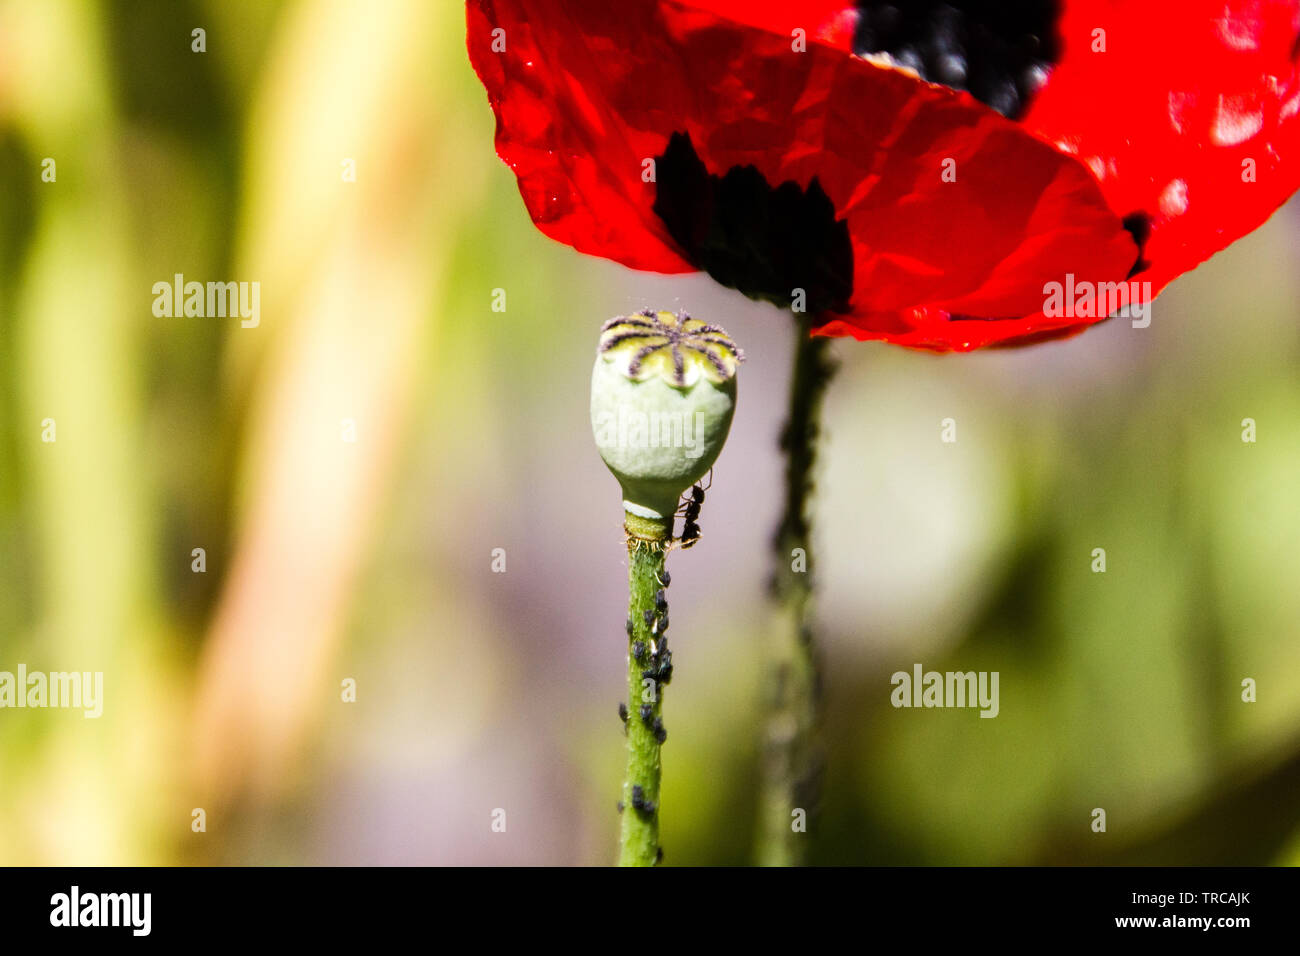 Ants are eating aphids on a capsule of a Greek poppy flower (Papaver rhoeas). Selective focus on aphids. Stock Photo